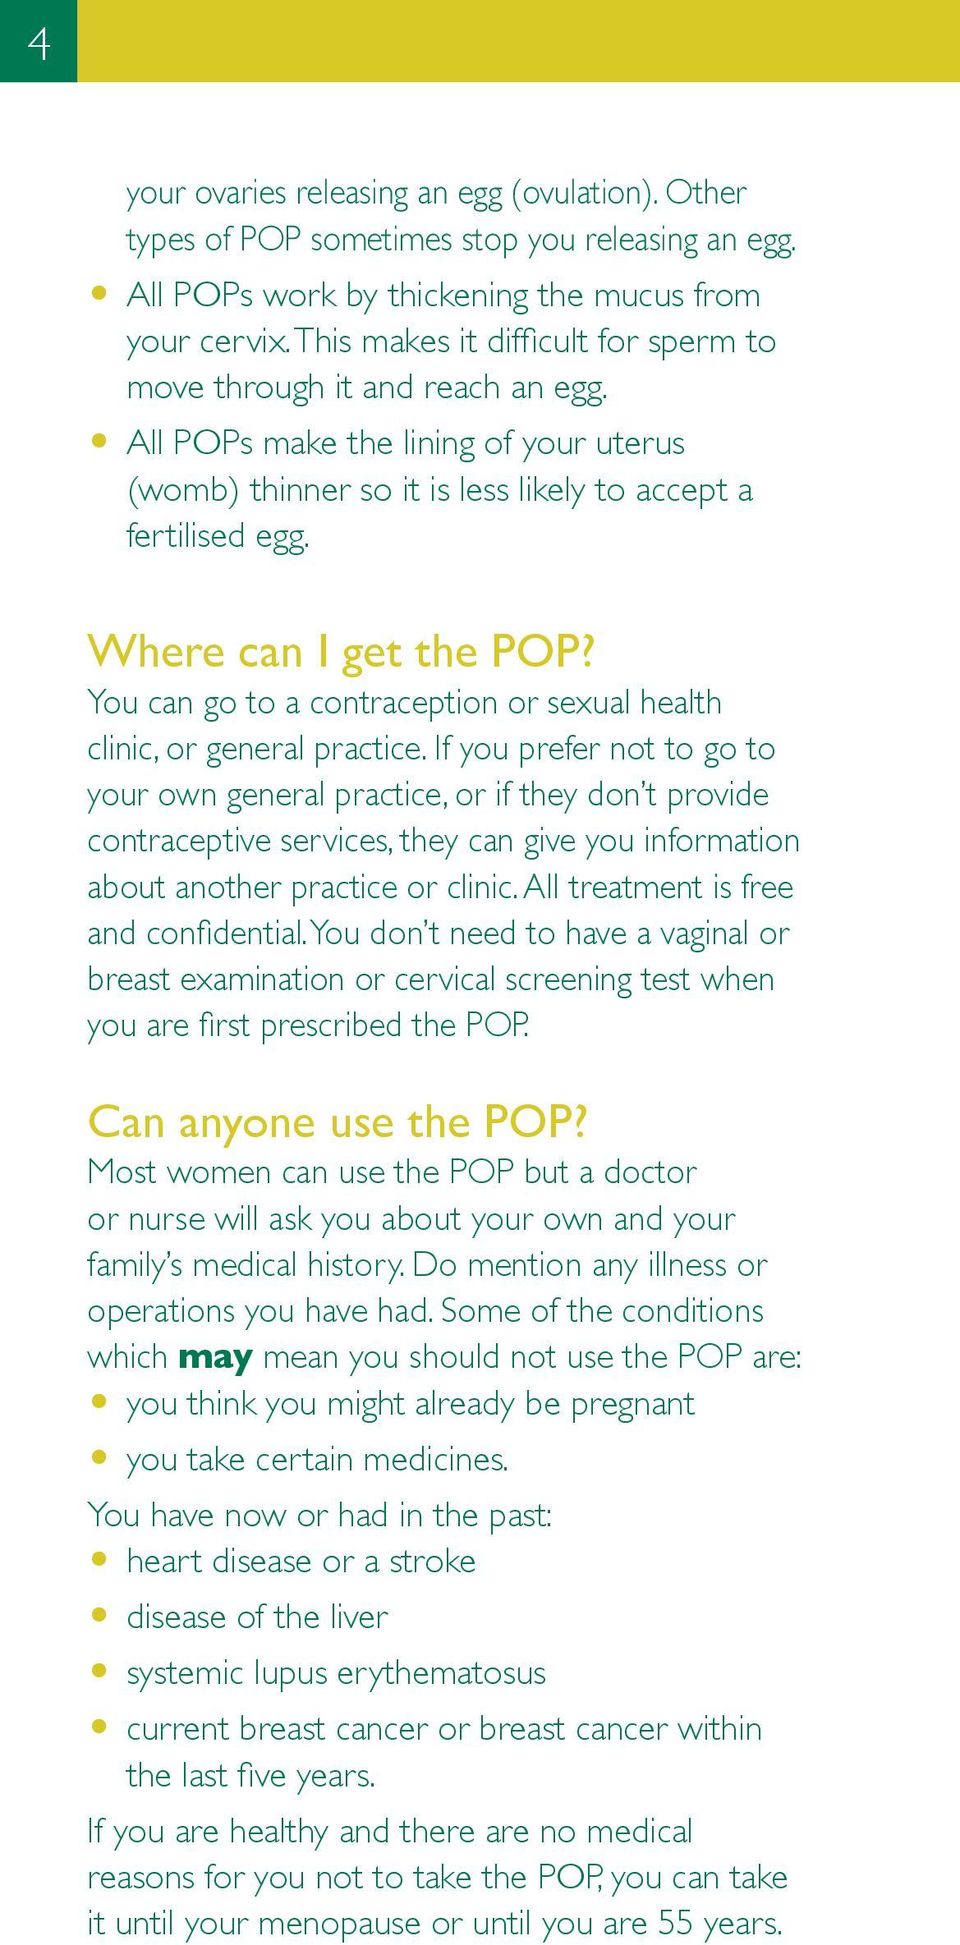 Where can I get the POP? You can go to a contraception or sexual health clinic, or general practice.